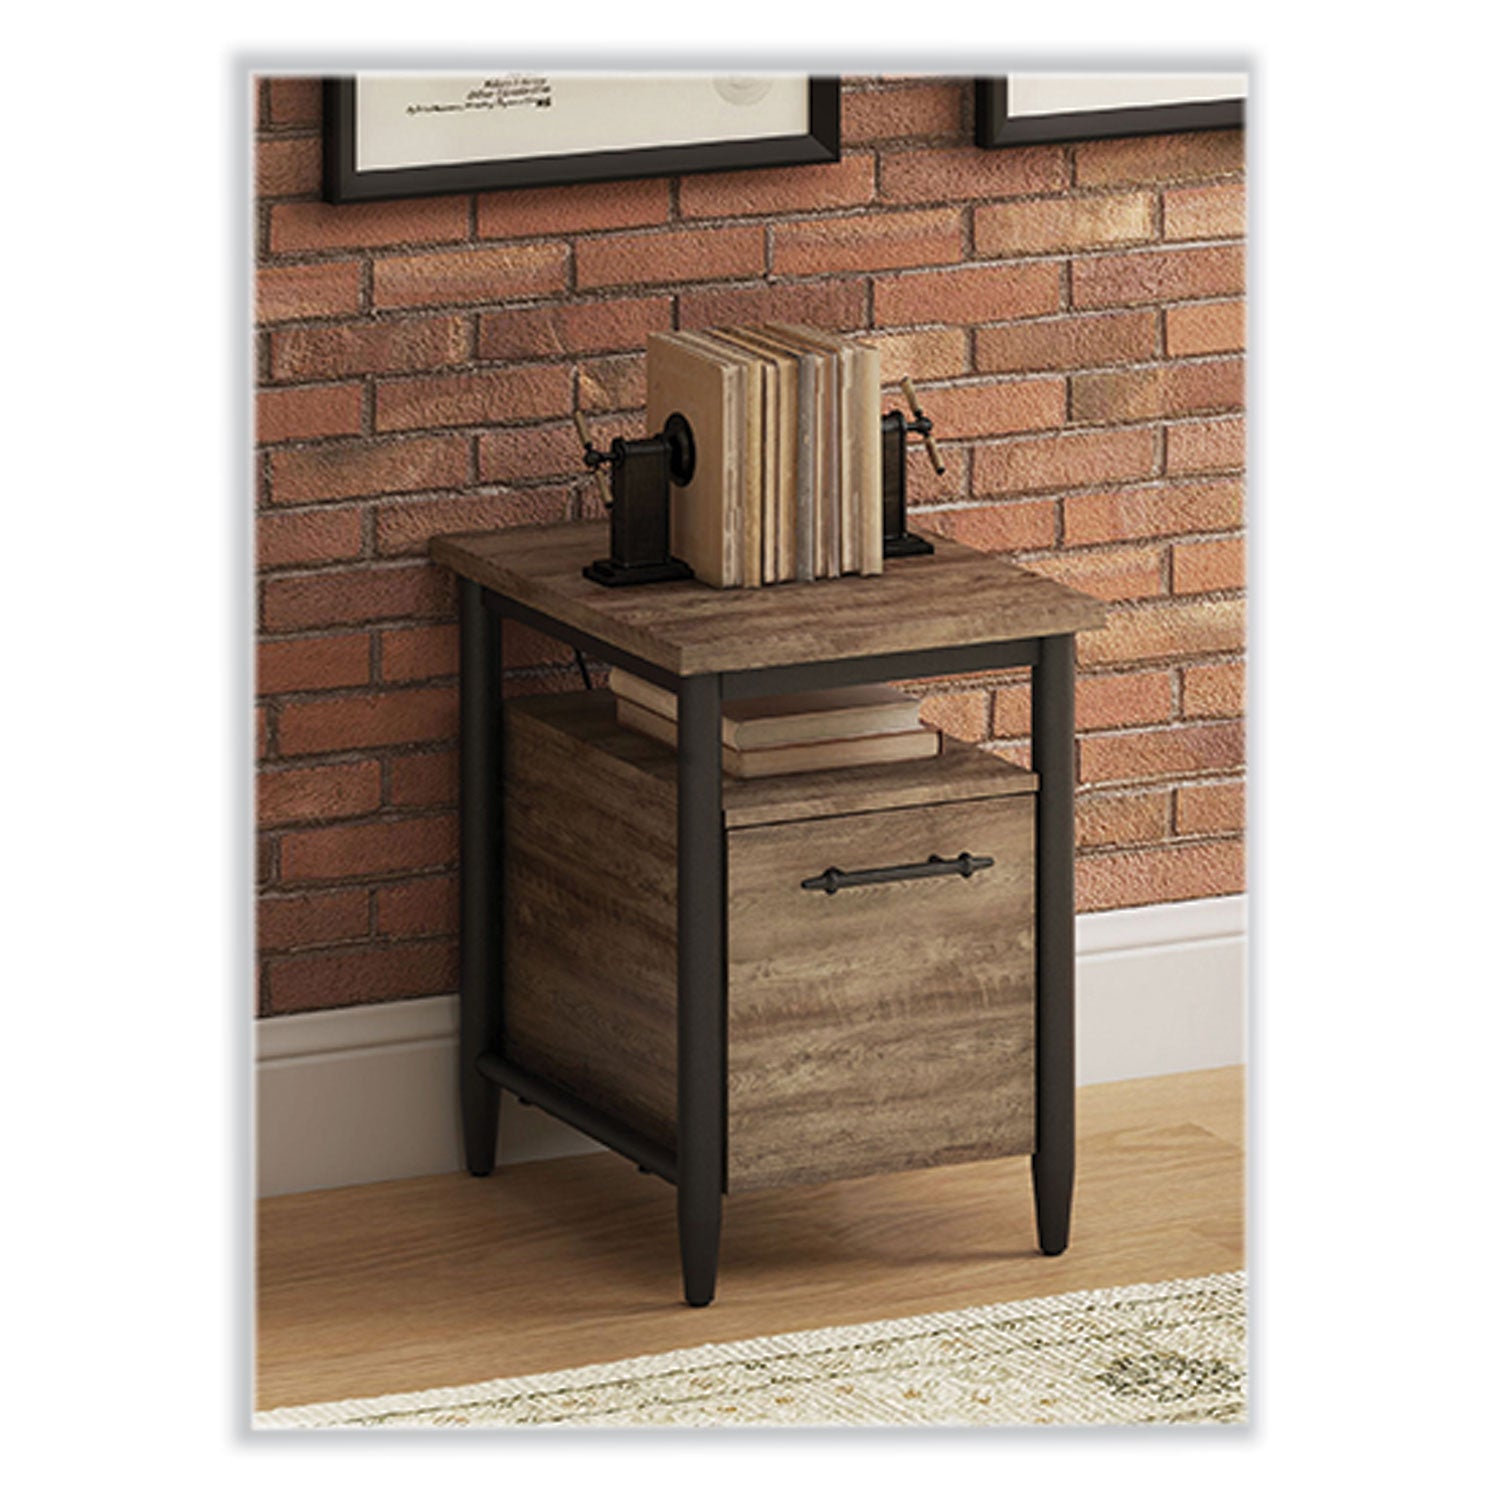 thomasville-breslyn-one-drawer-vertical-file-cabinet-with-shelf-letter-legal-crosscut-hickory-16-x-20-x-222_whlbrdftv - 4